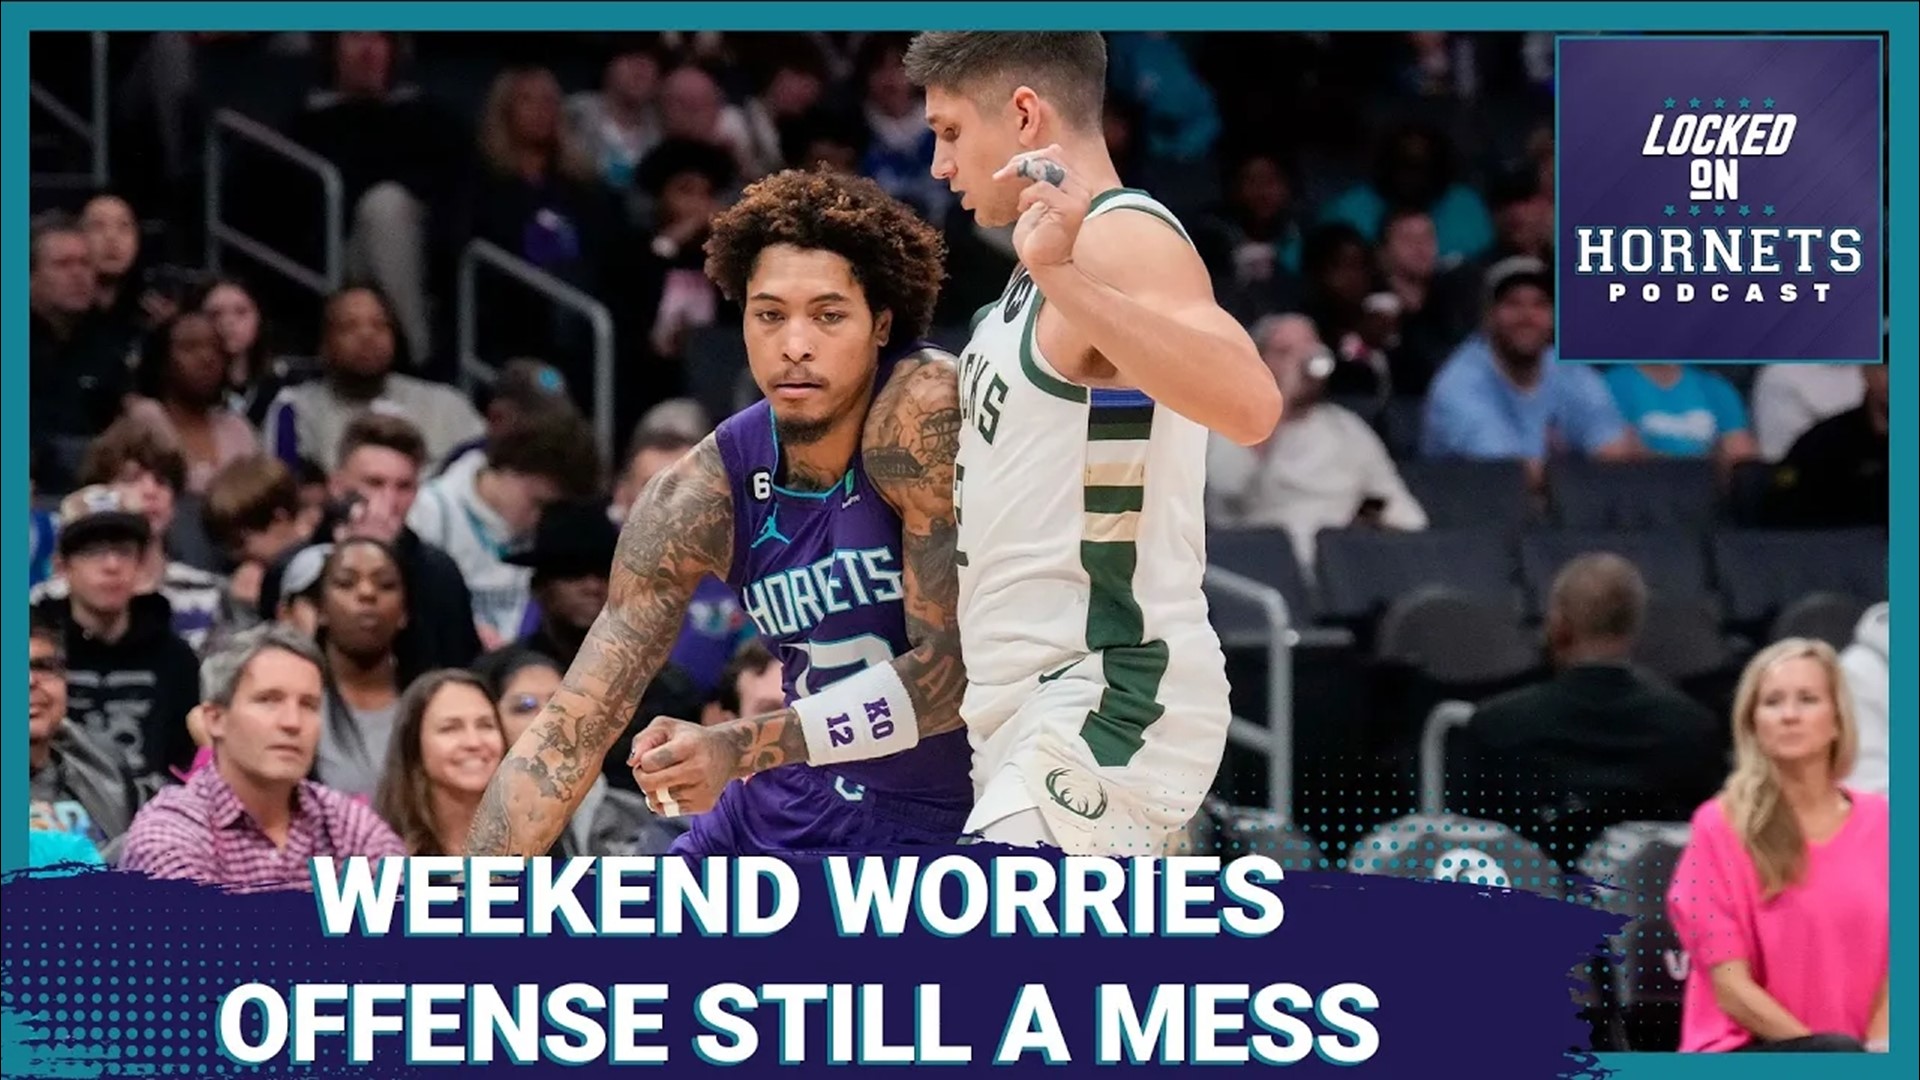 Charlotte Hornets getting more wins but offense still lagging